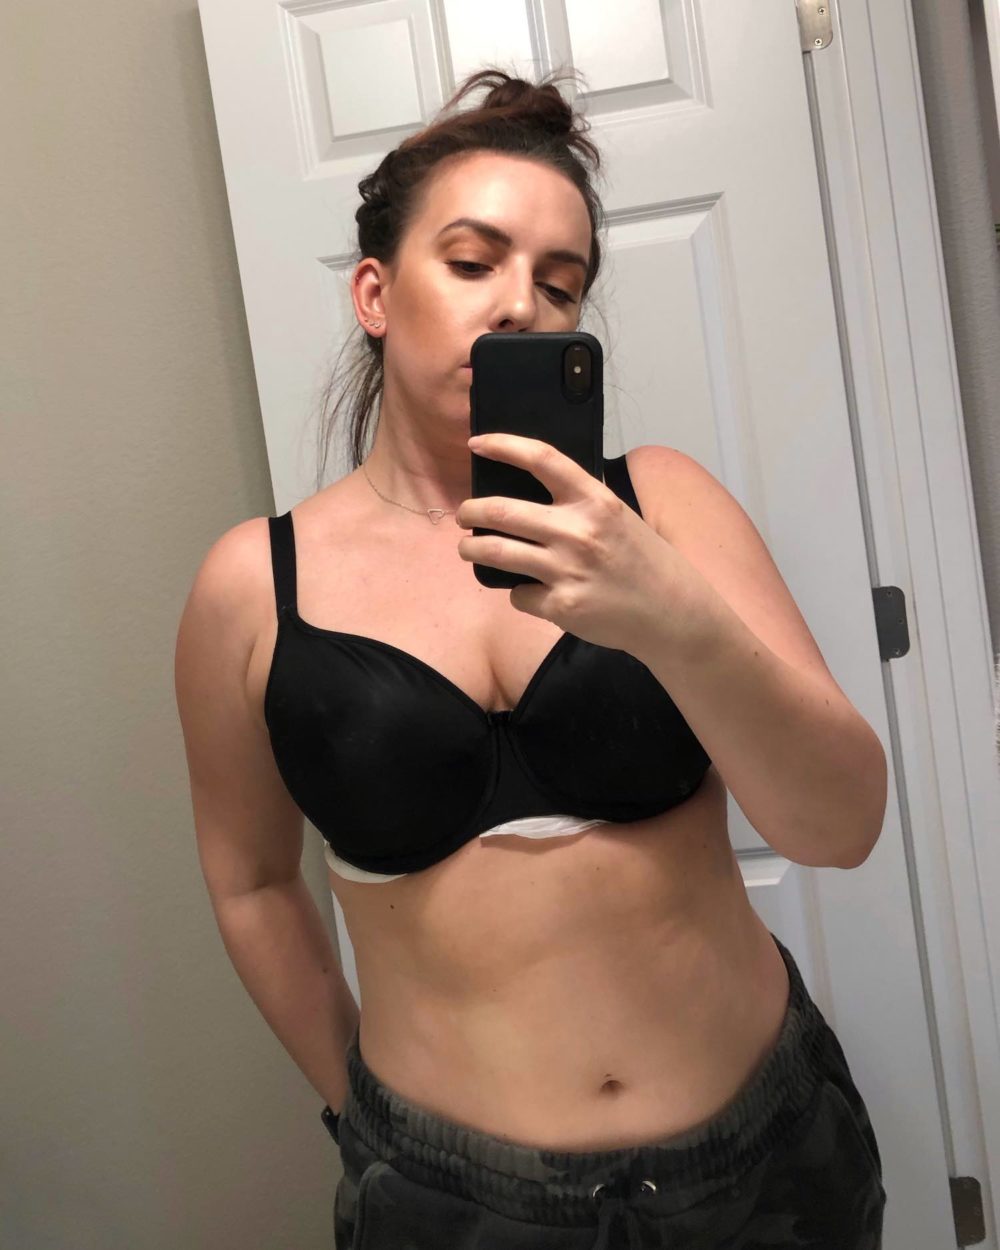 Breast Reduction Surgery 1 Month Post Op @chelseapearl